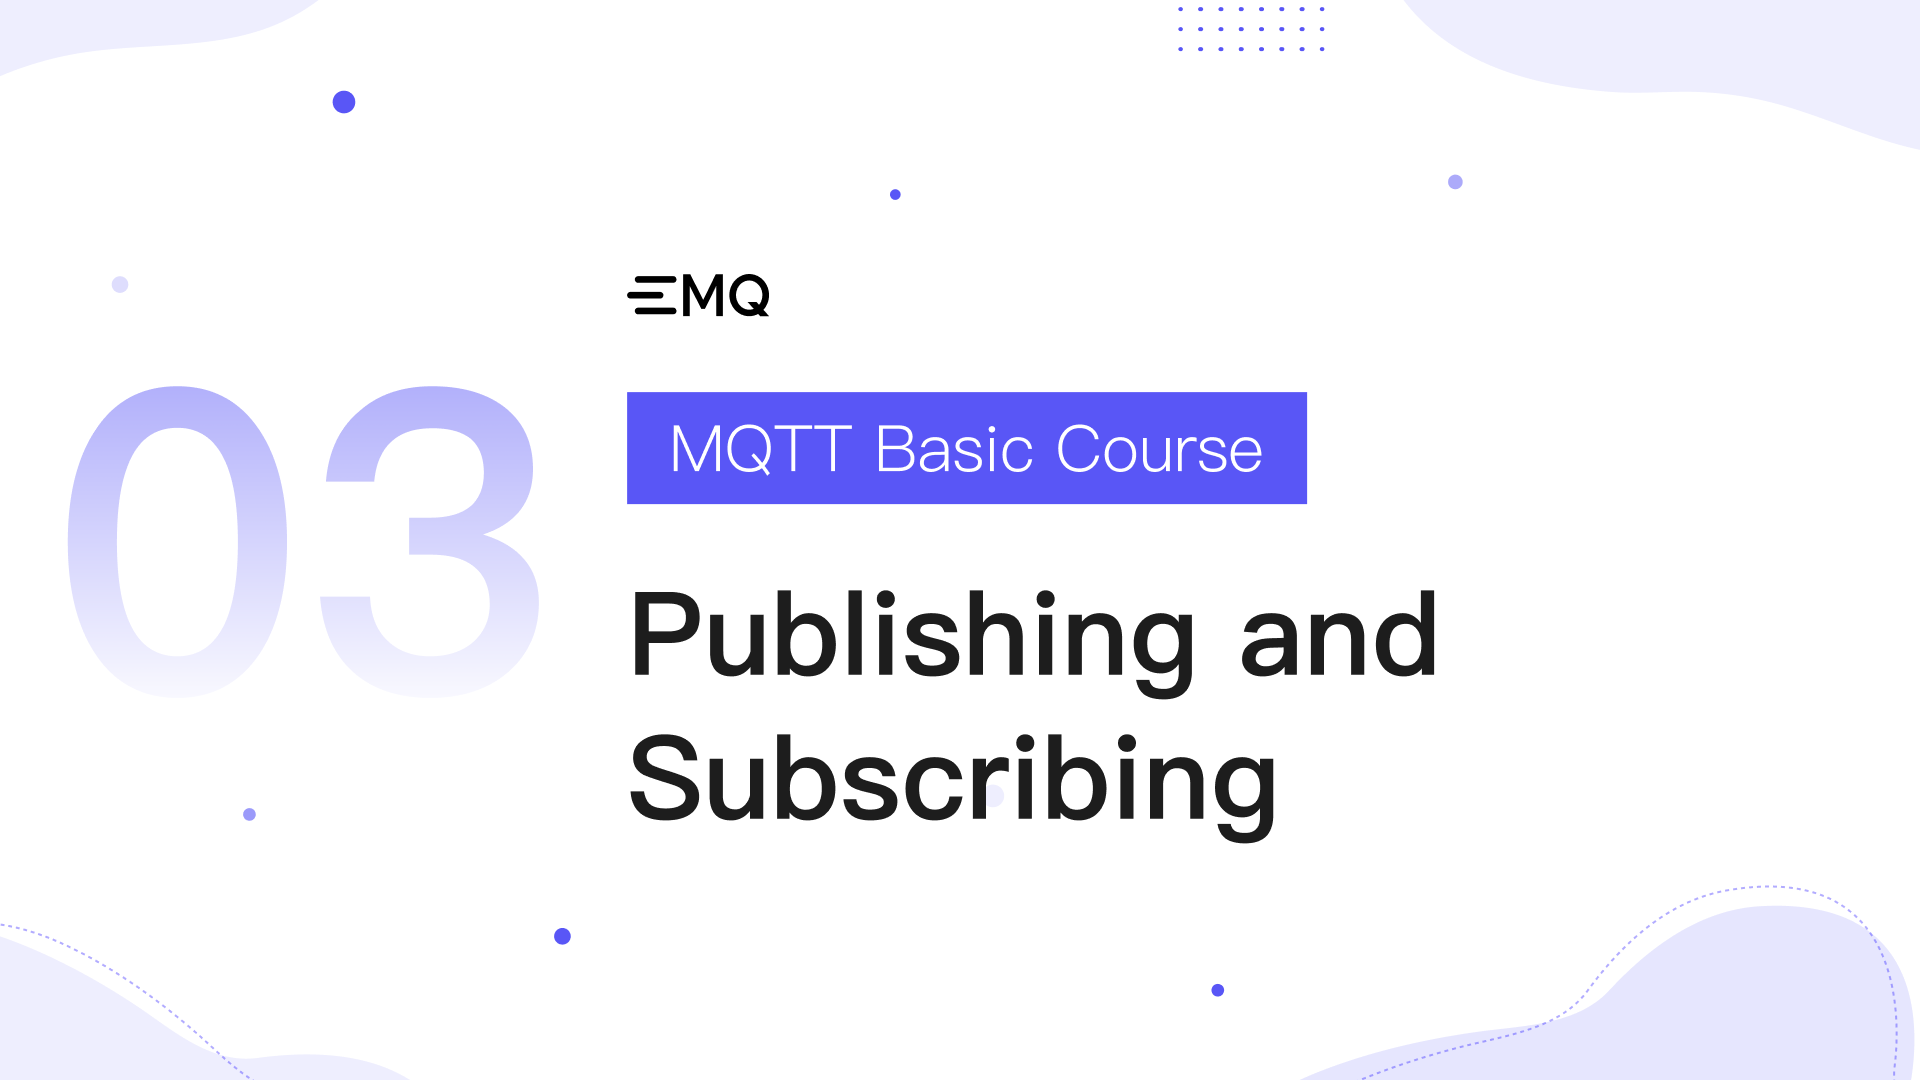 Lesson 3: Publishing and Subscribing - MQTT Basic Course